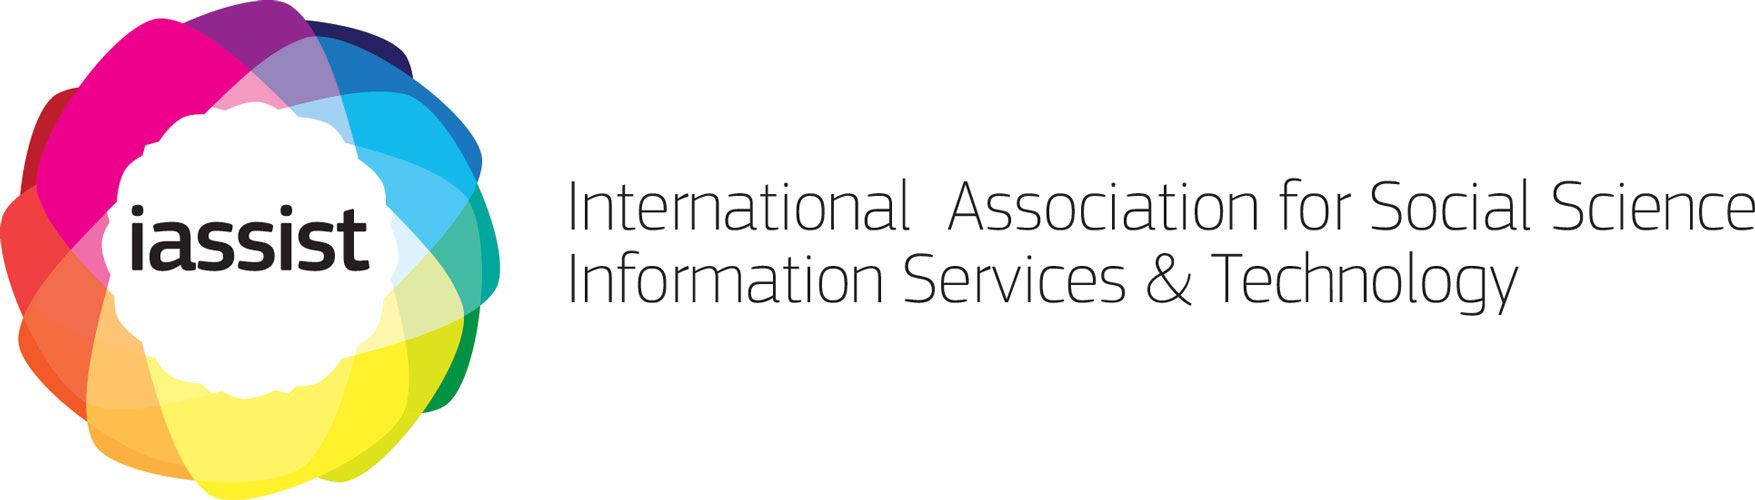 International Association for Social Science Information Services and Technology (IASSIST)